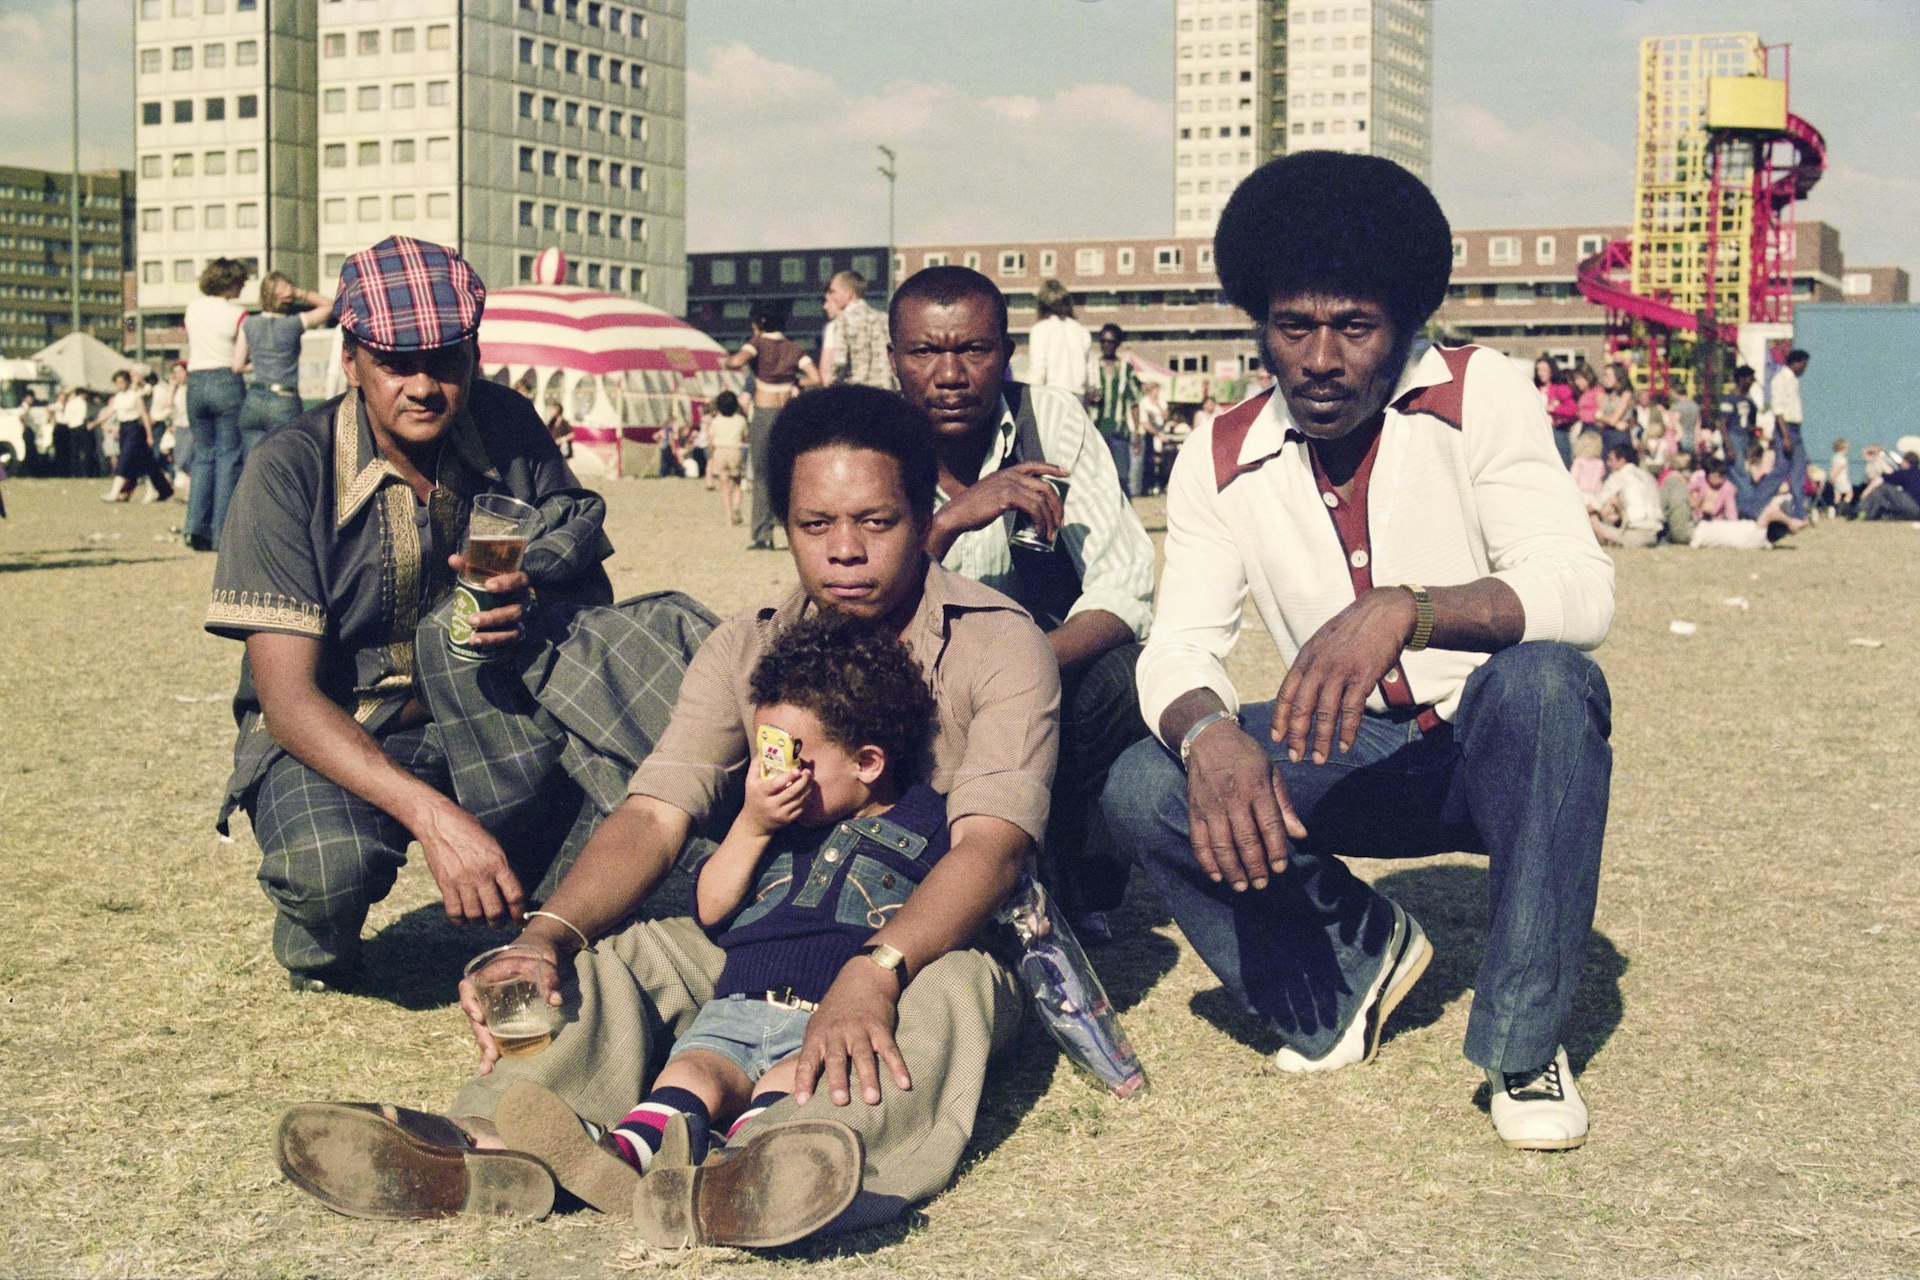 A portrait of black British life in the ’70s